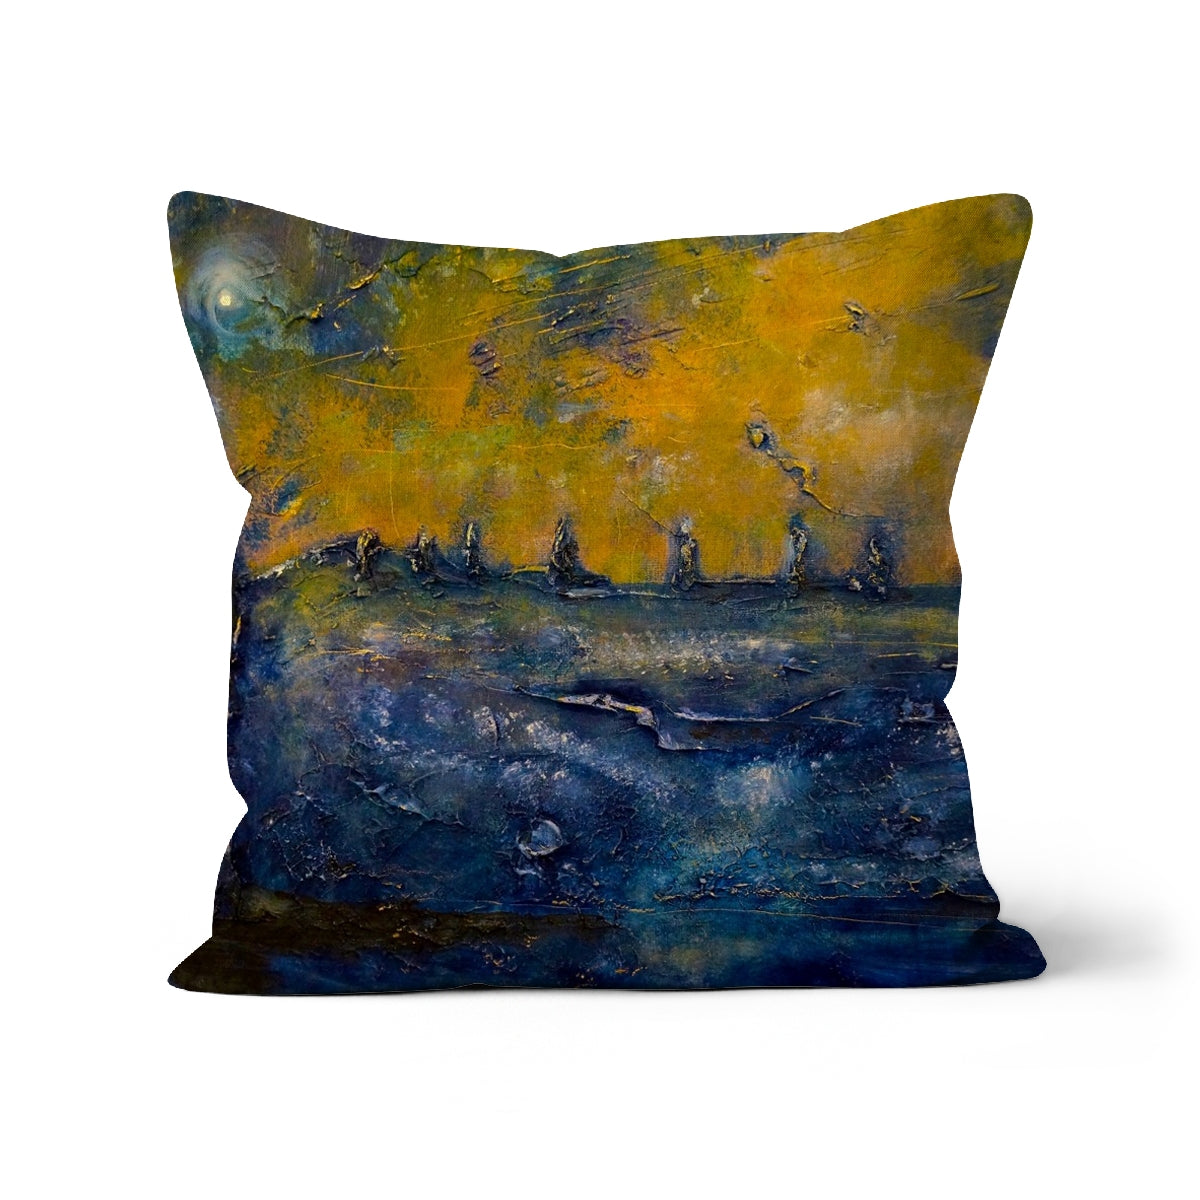 Brodgar Moonlight Orkney Art Gifts Cushion-Cushions-Orkney Art Gallery-Canvas-24"x24"-Paintings, Prints, Homeware, Art Gifts From Scotland By Scottish Artist Kevin Hunter